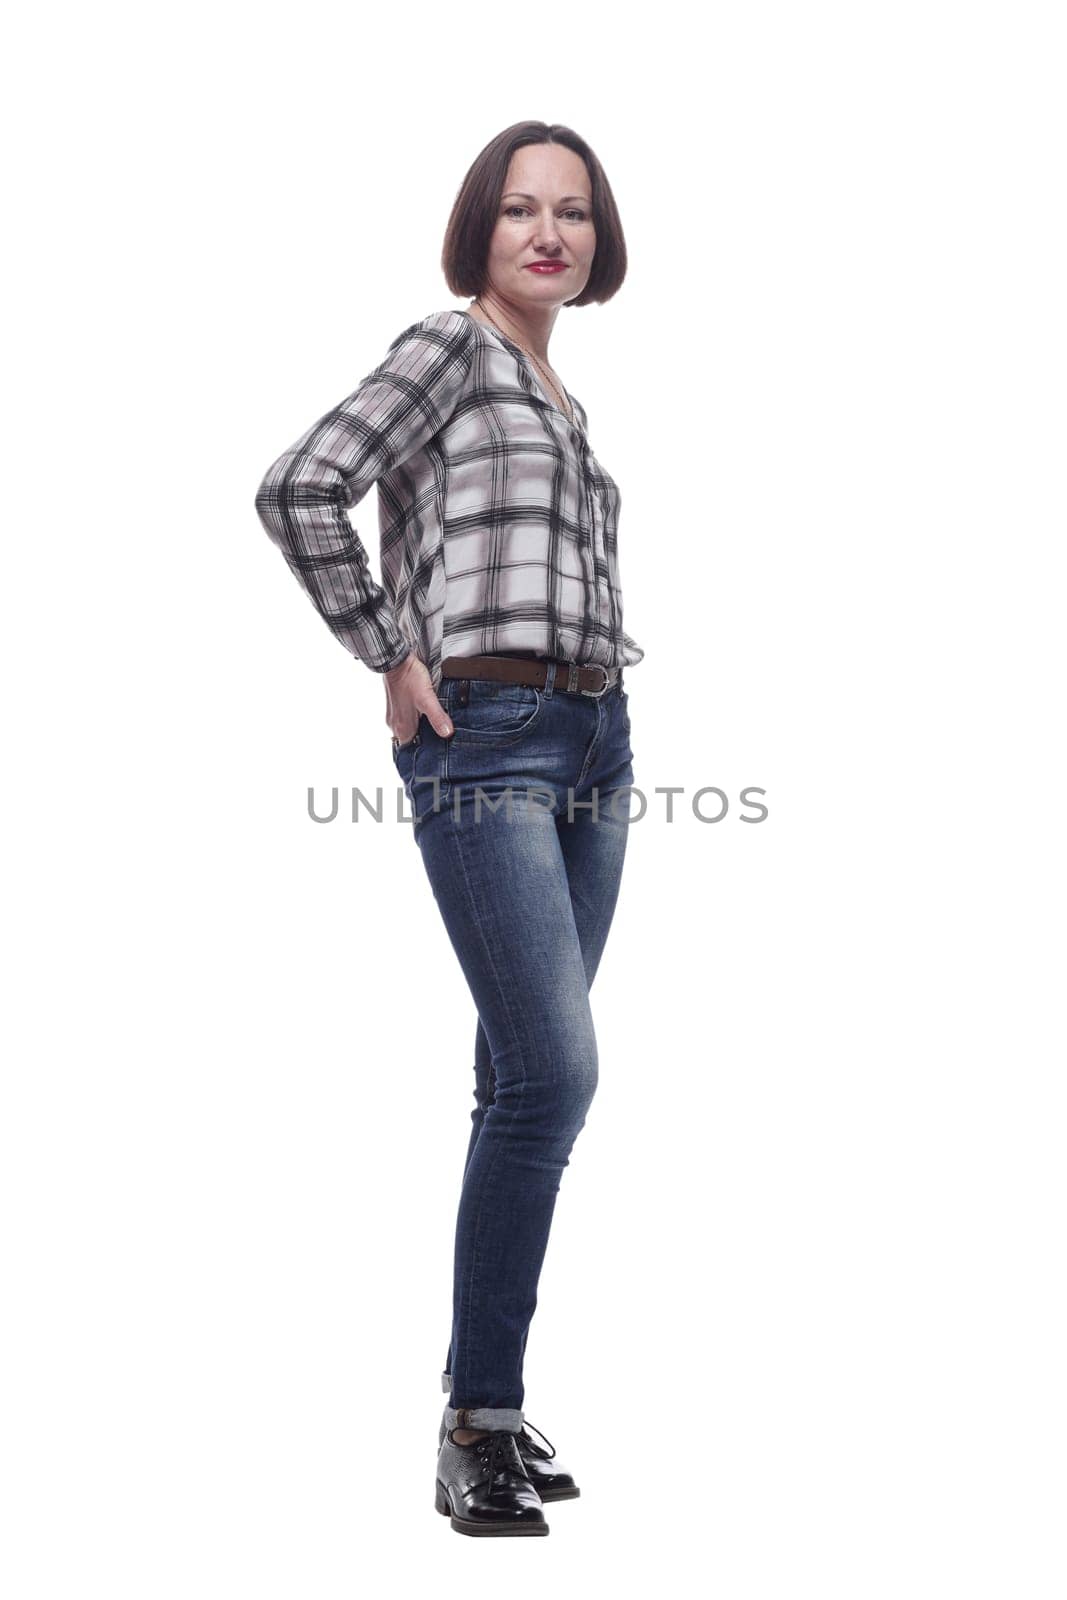 attractive mature woman in jeans looking at you by asdf